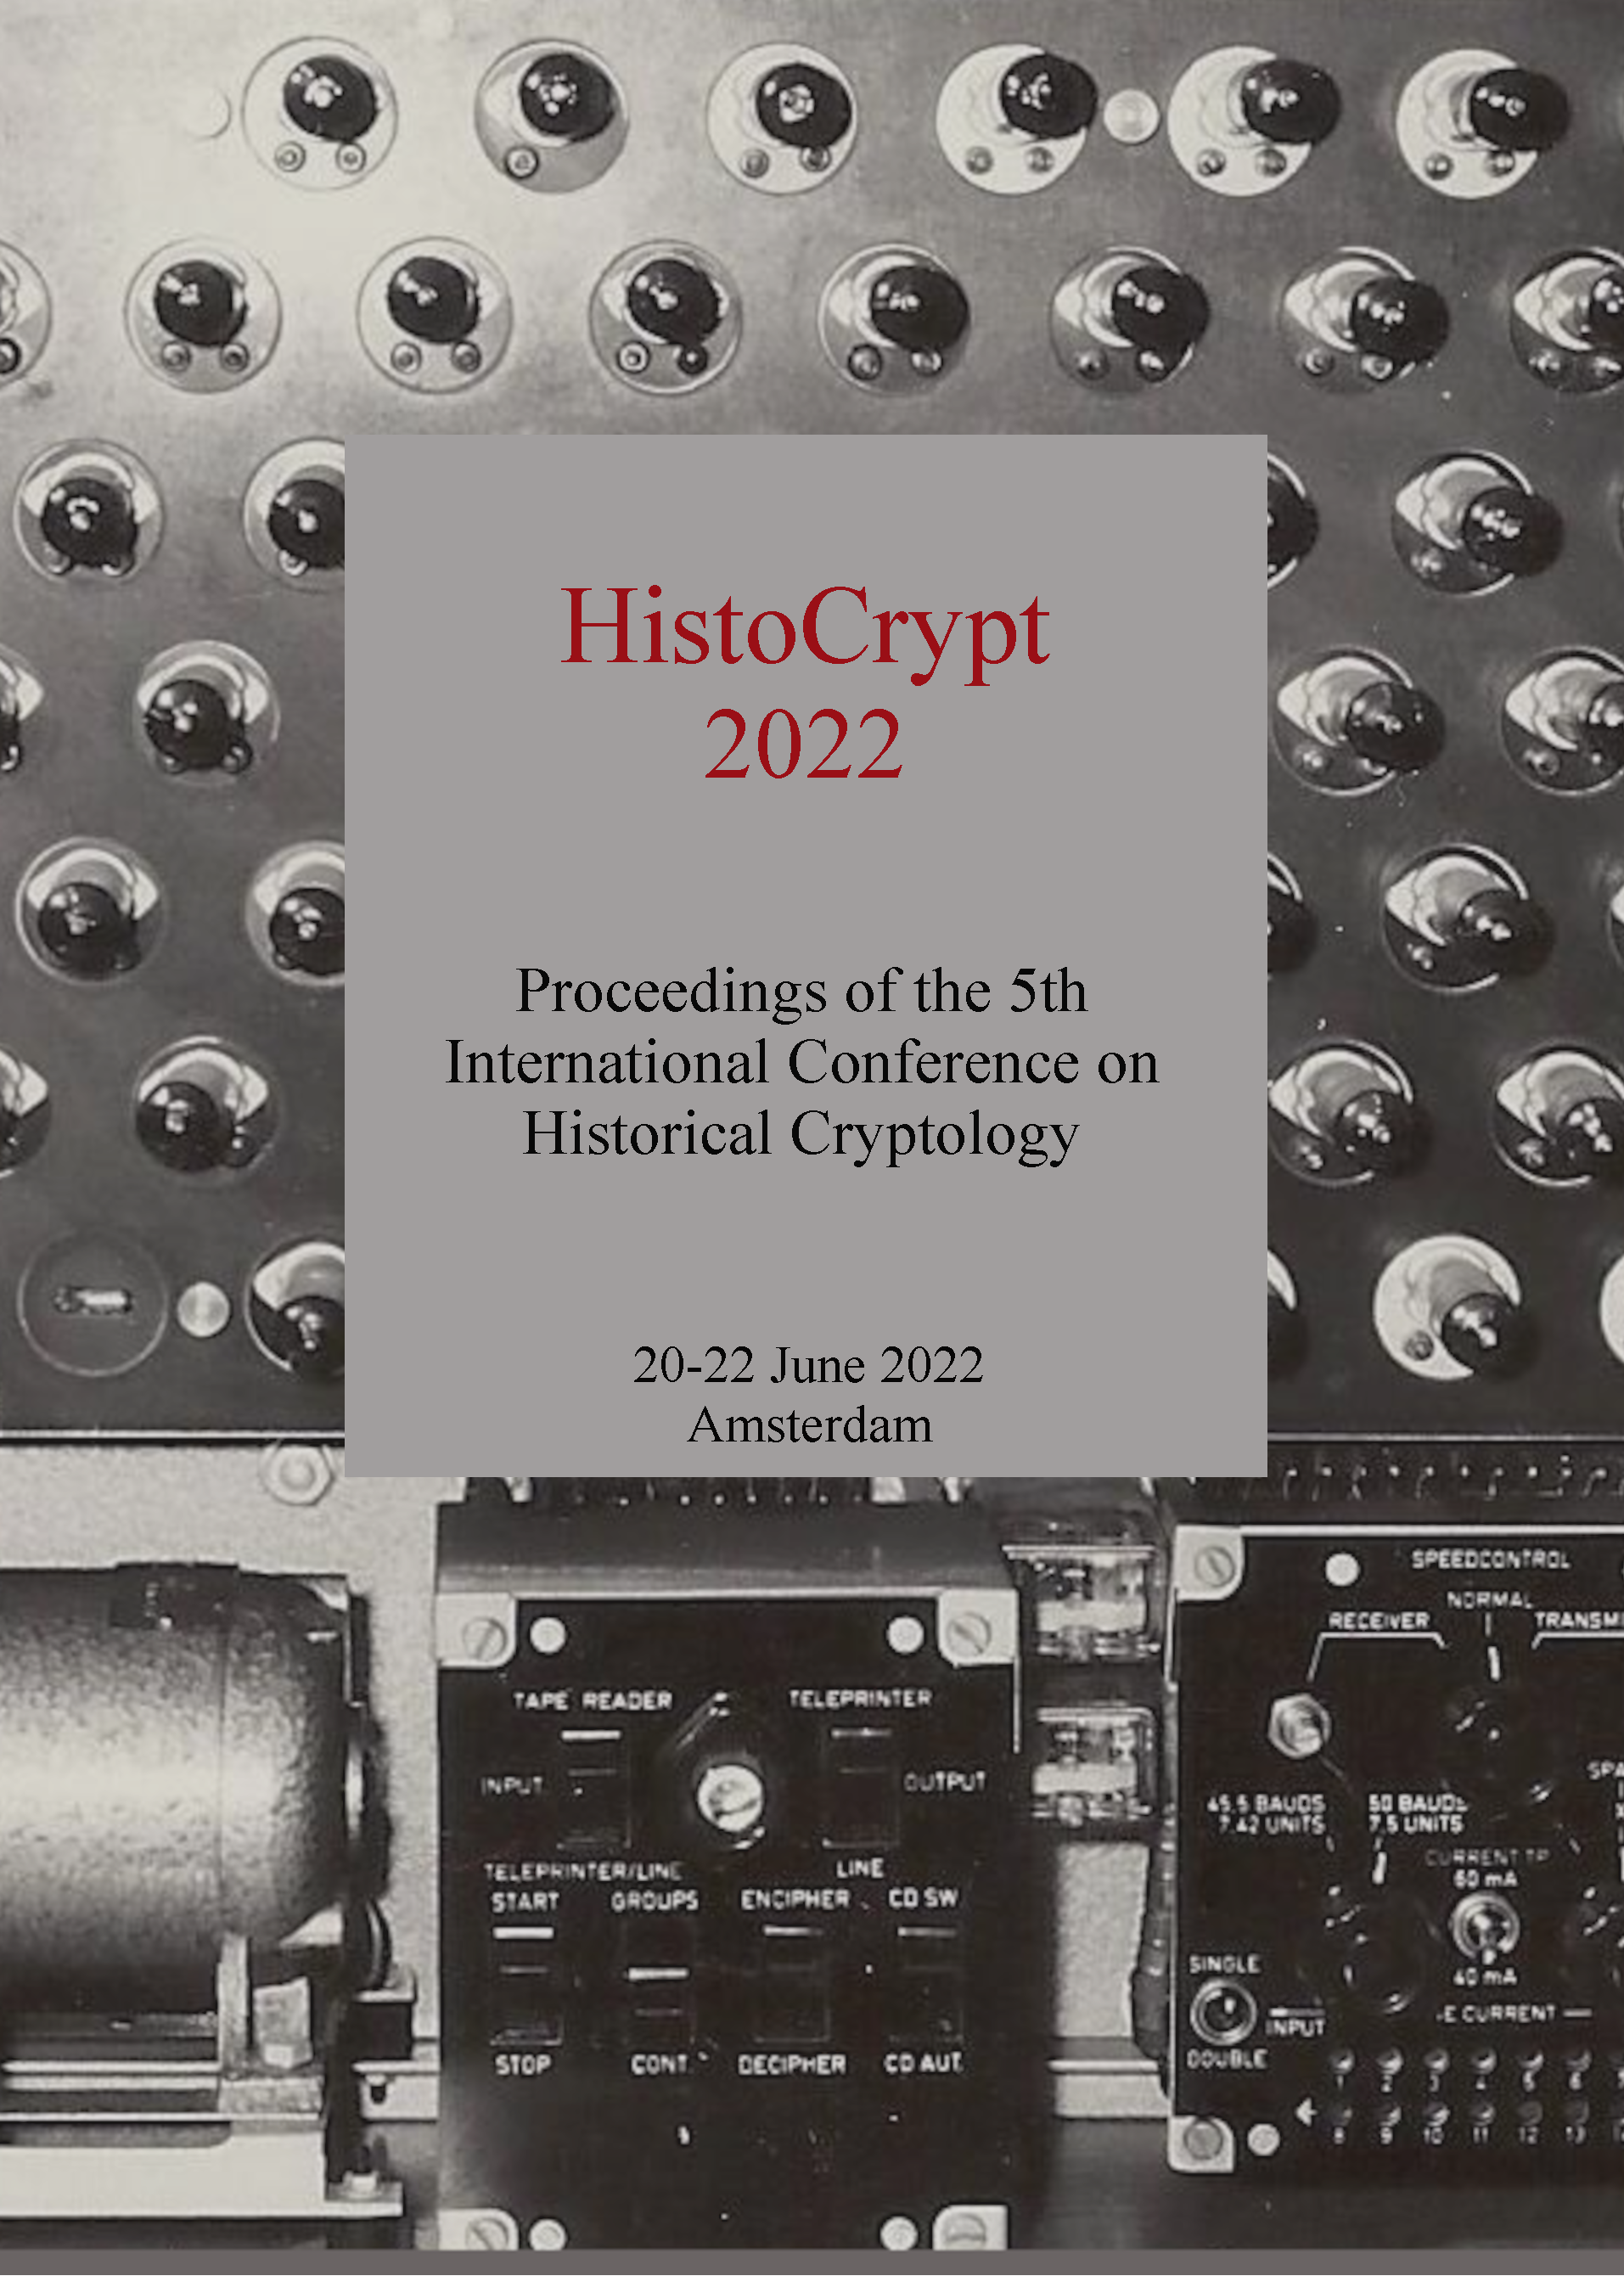 					View Proceedings of the 5th International Conference on Historical Cryptology HistoCrypt 2022
				